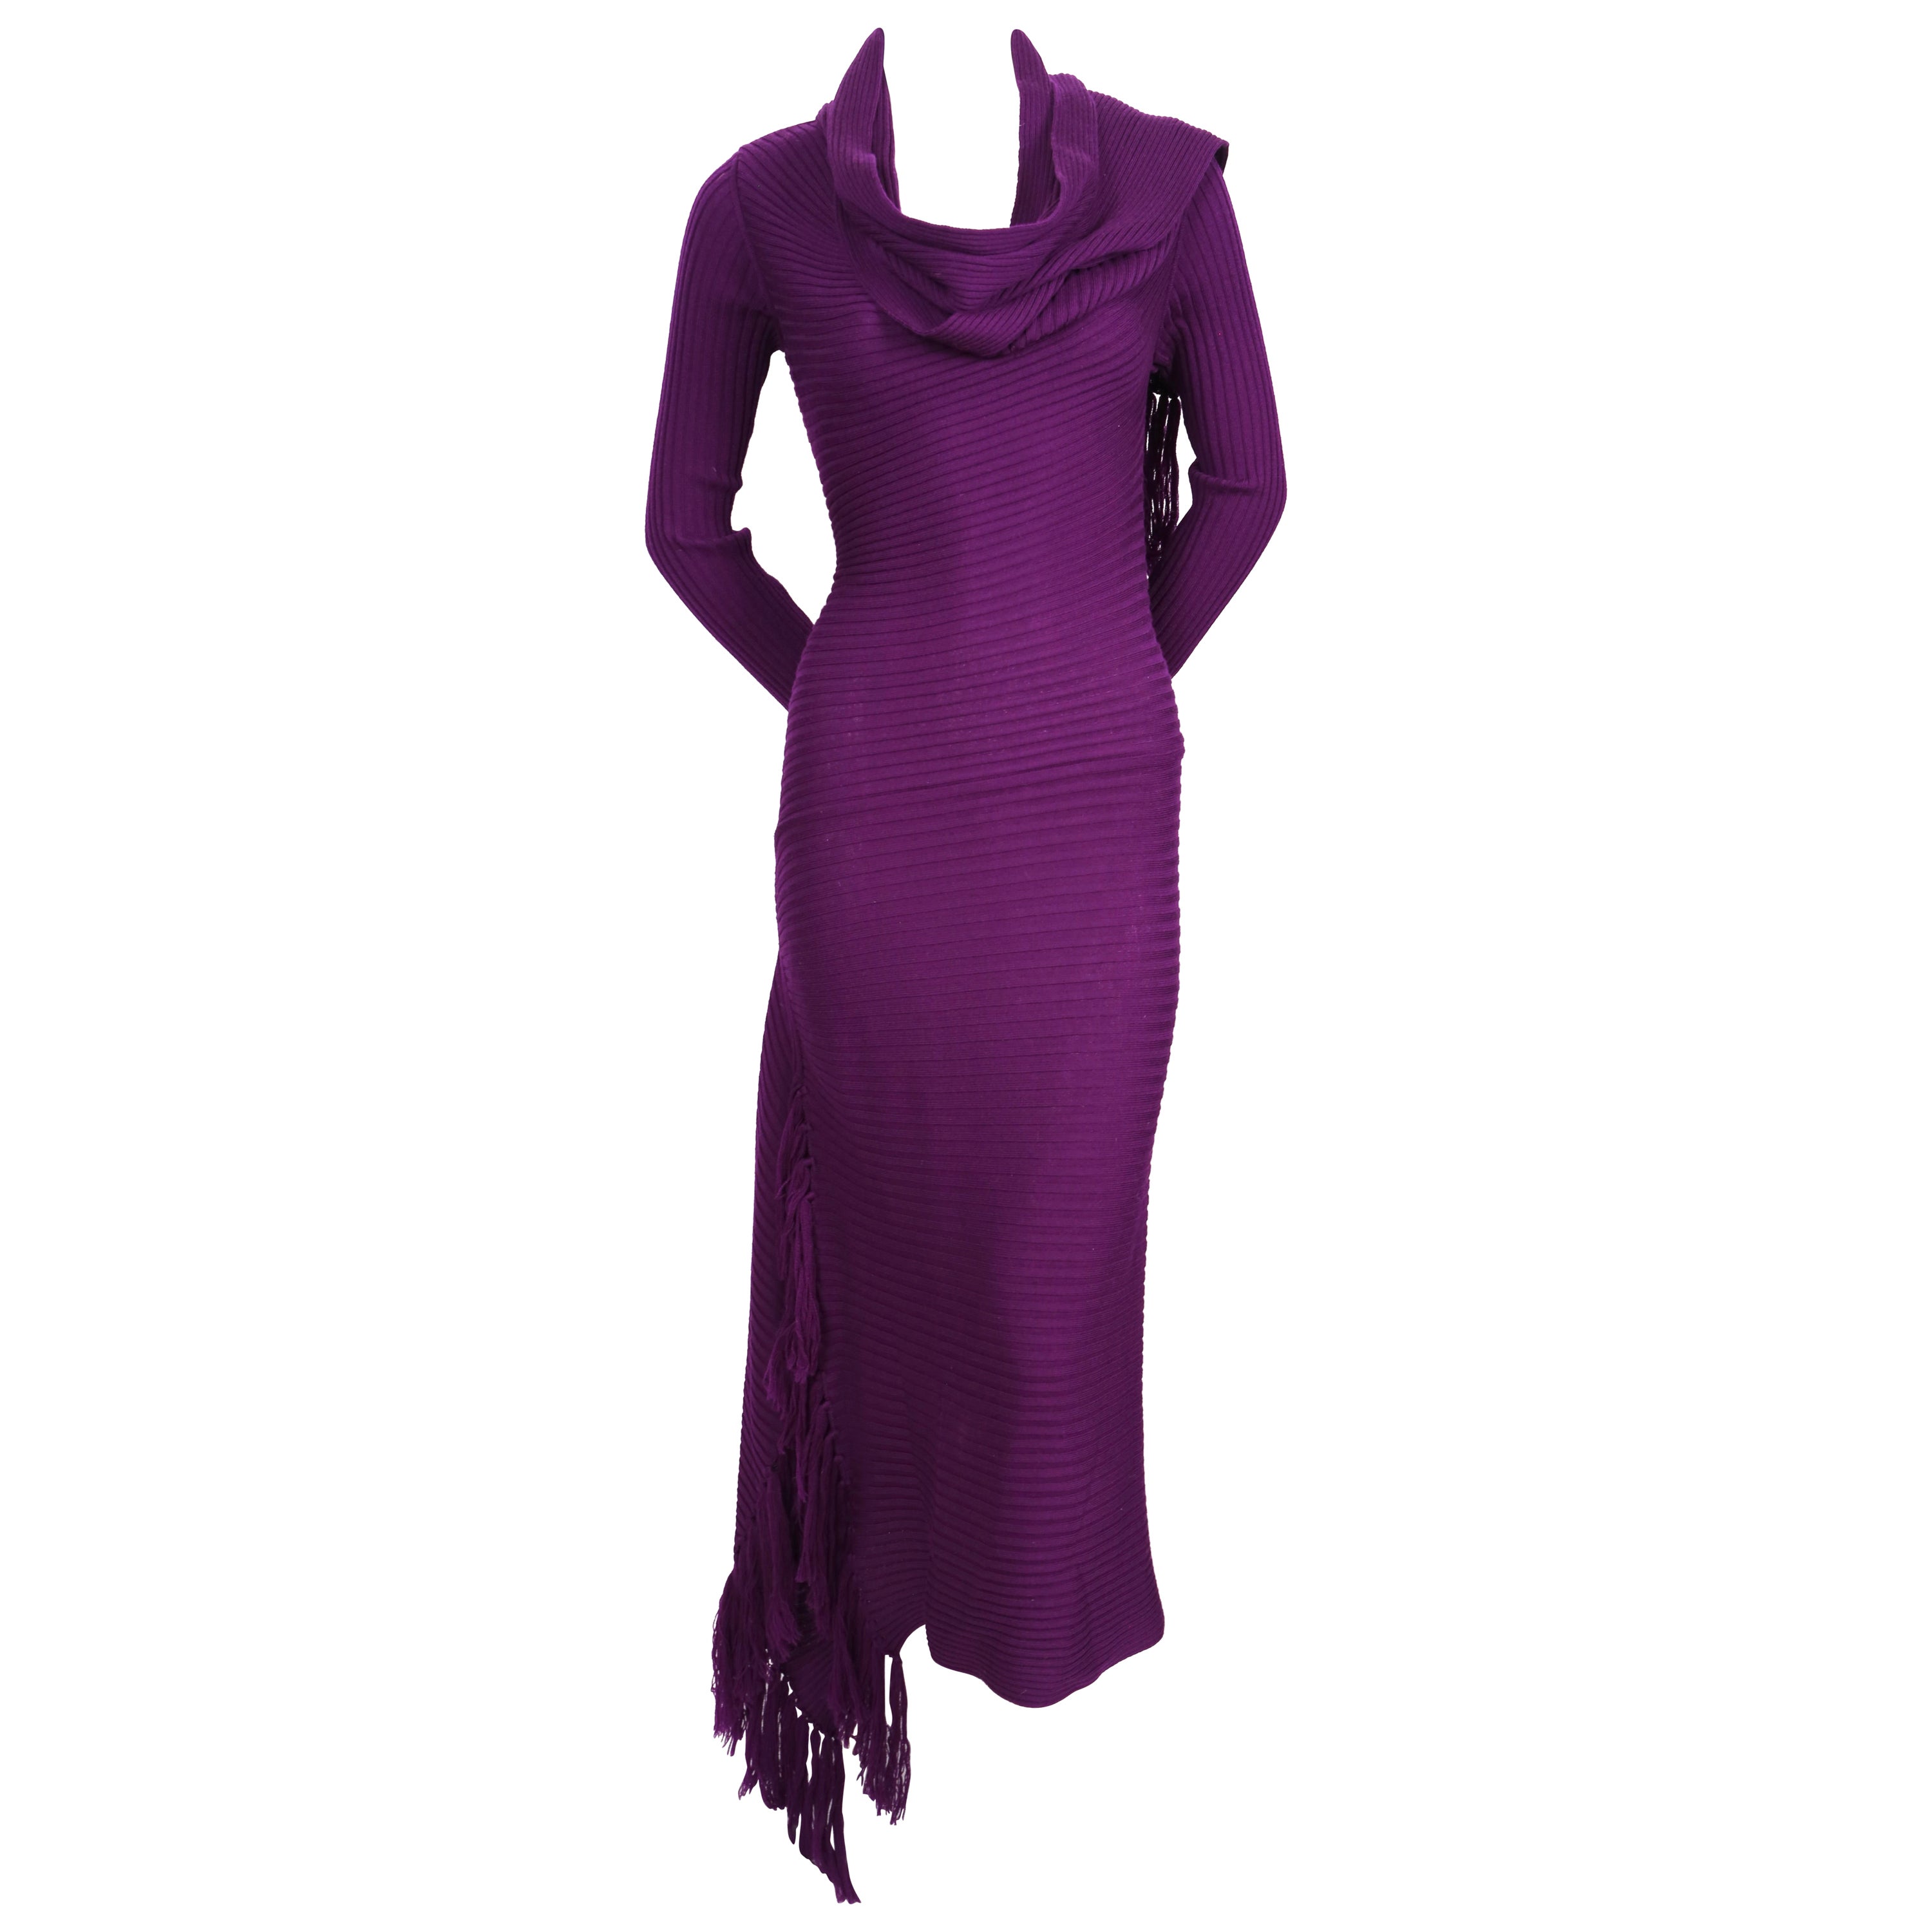  JEAN PAUL GAULTIER purple ribbed knit dress with scarf For Sale